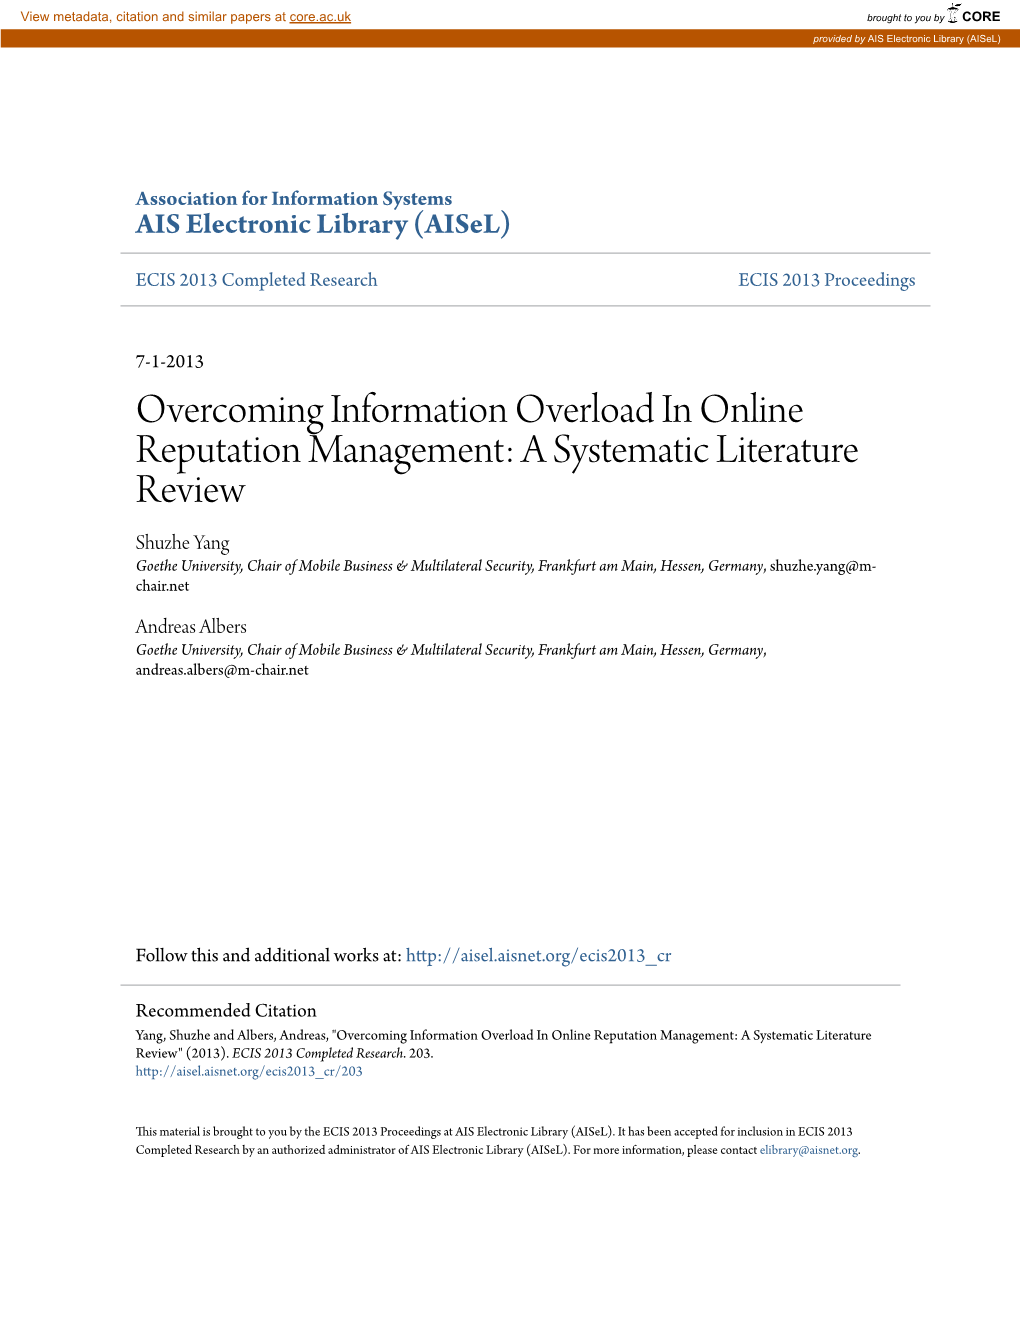 Overcoming Information Overload in Online Reputation Management: A